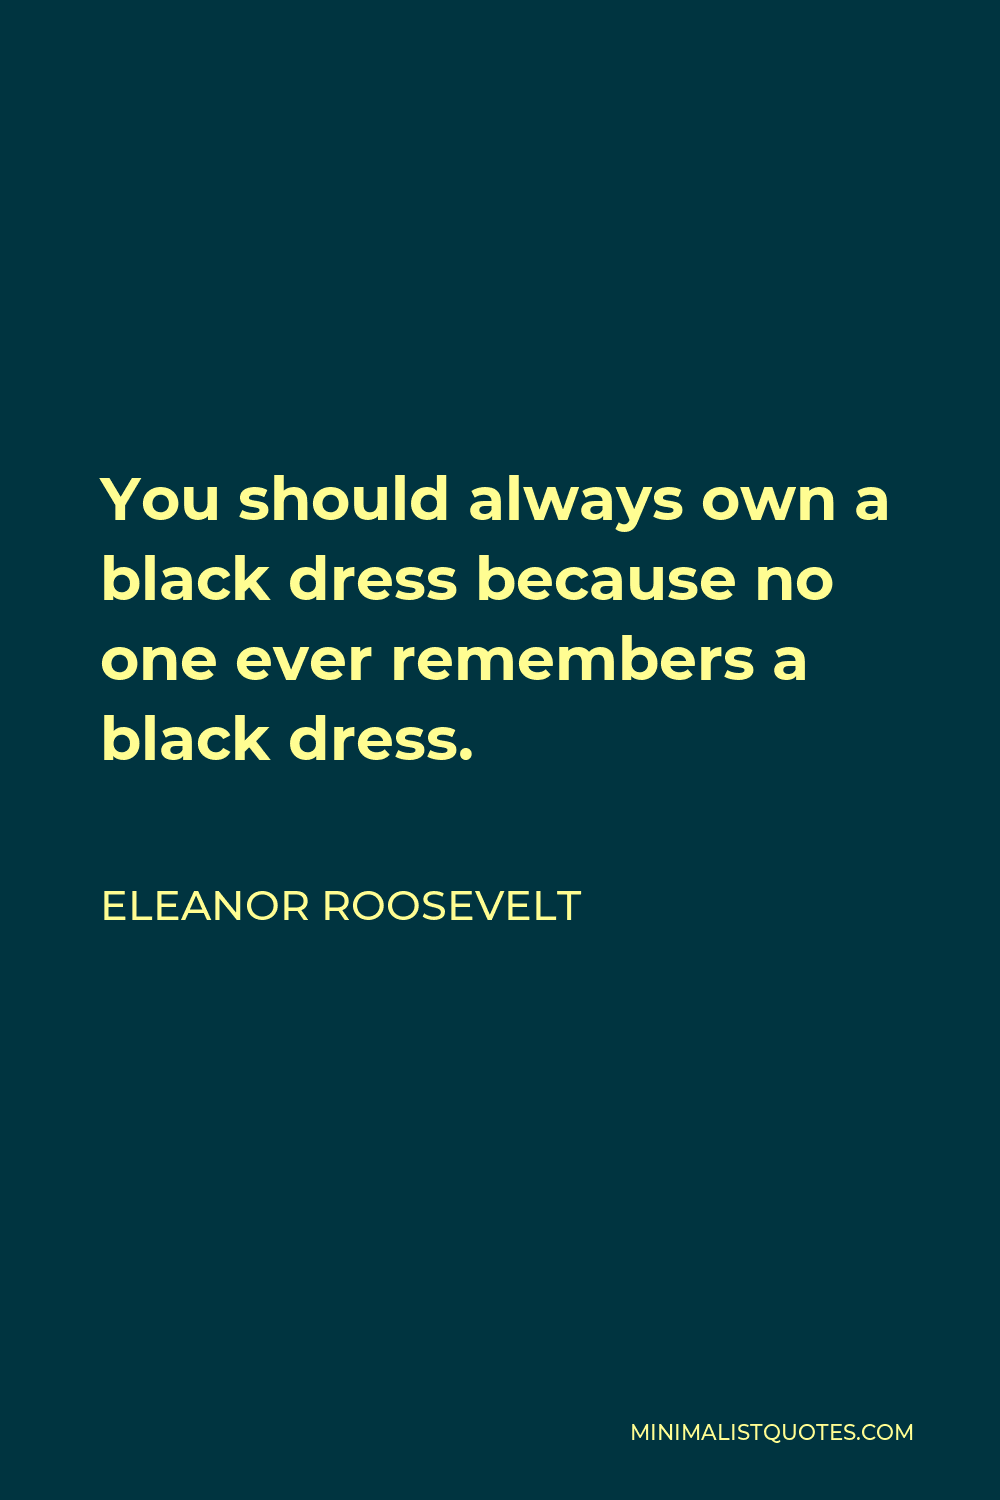 Eleanor Roosevelt Quote - You should always own a black dress because no one ever remembers a black dress.